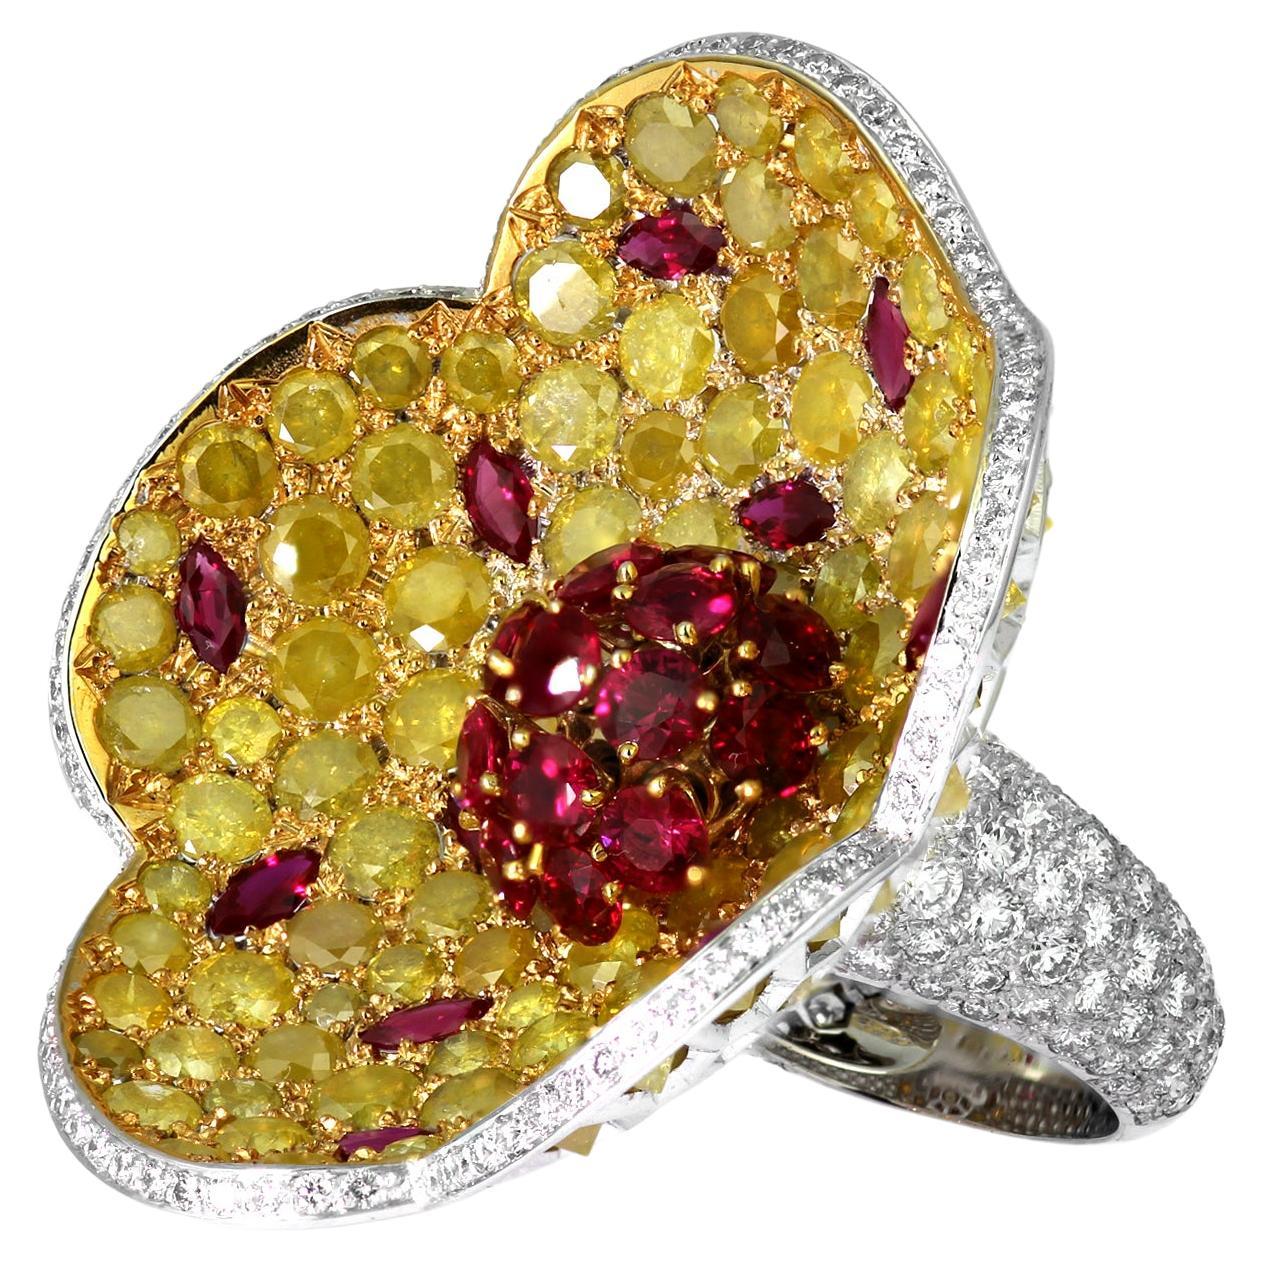 Modern Designer De Grisogono Big Floral Cocktail Ring with Ruby, Yellow & White Diamond